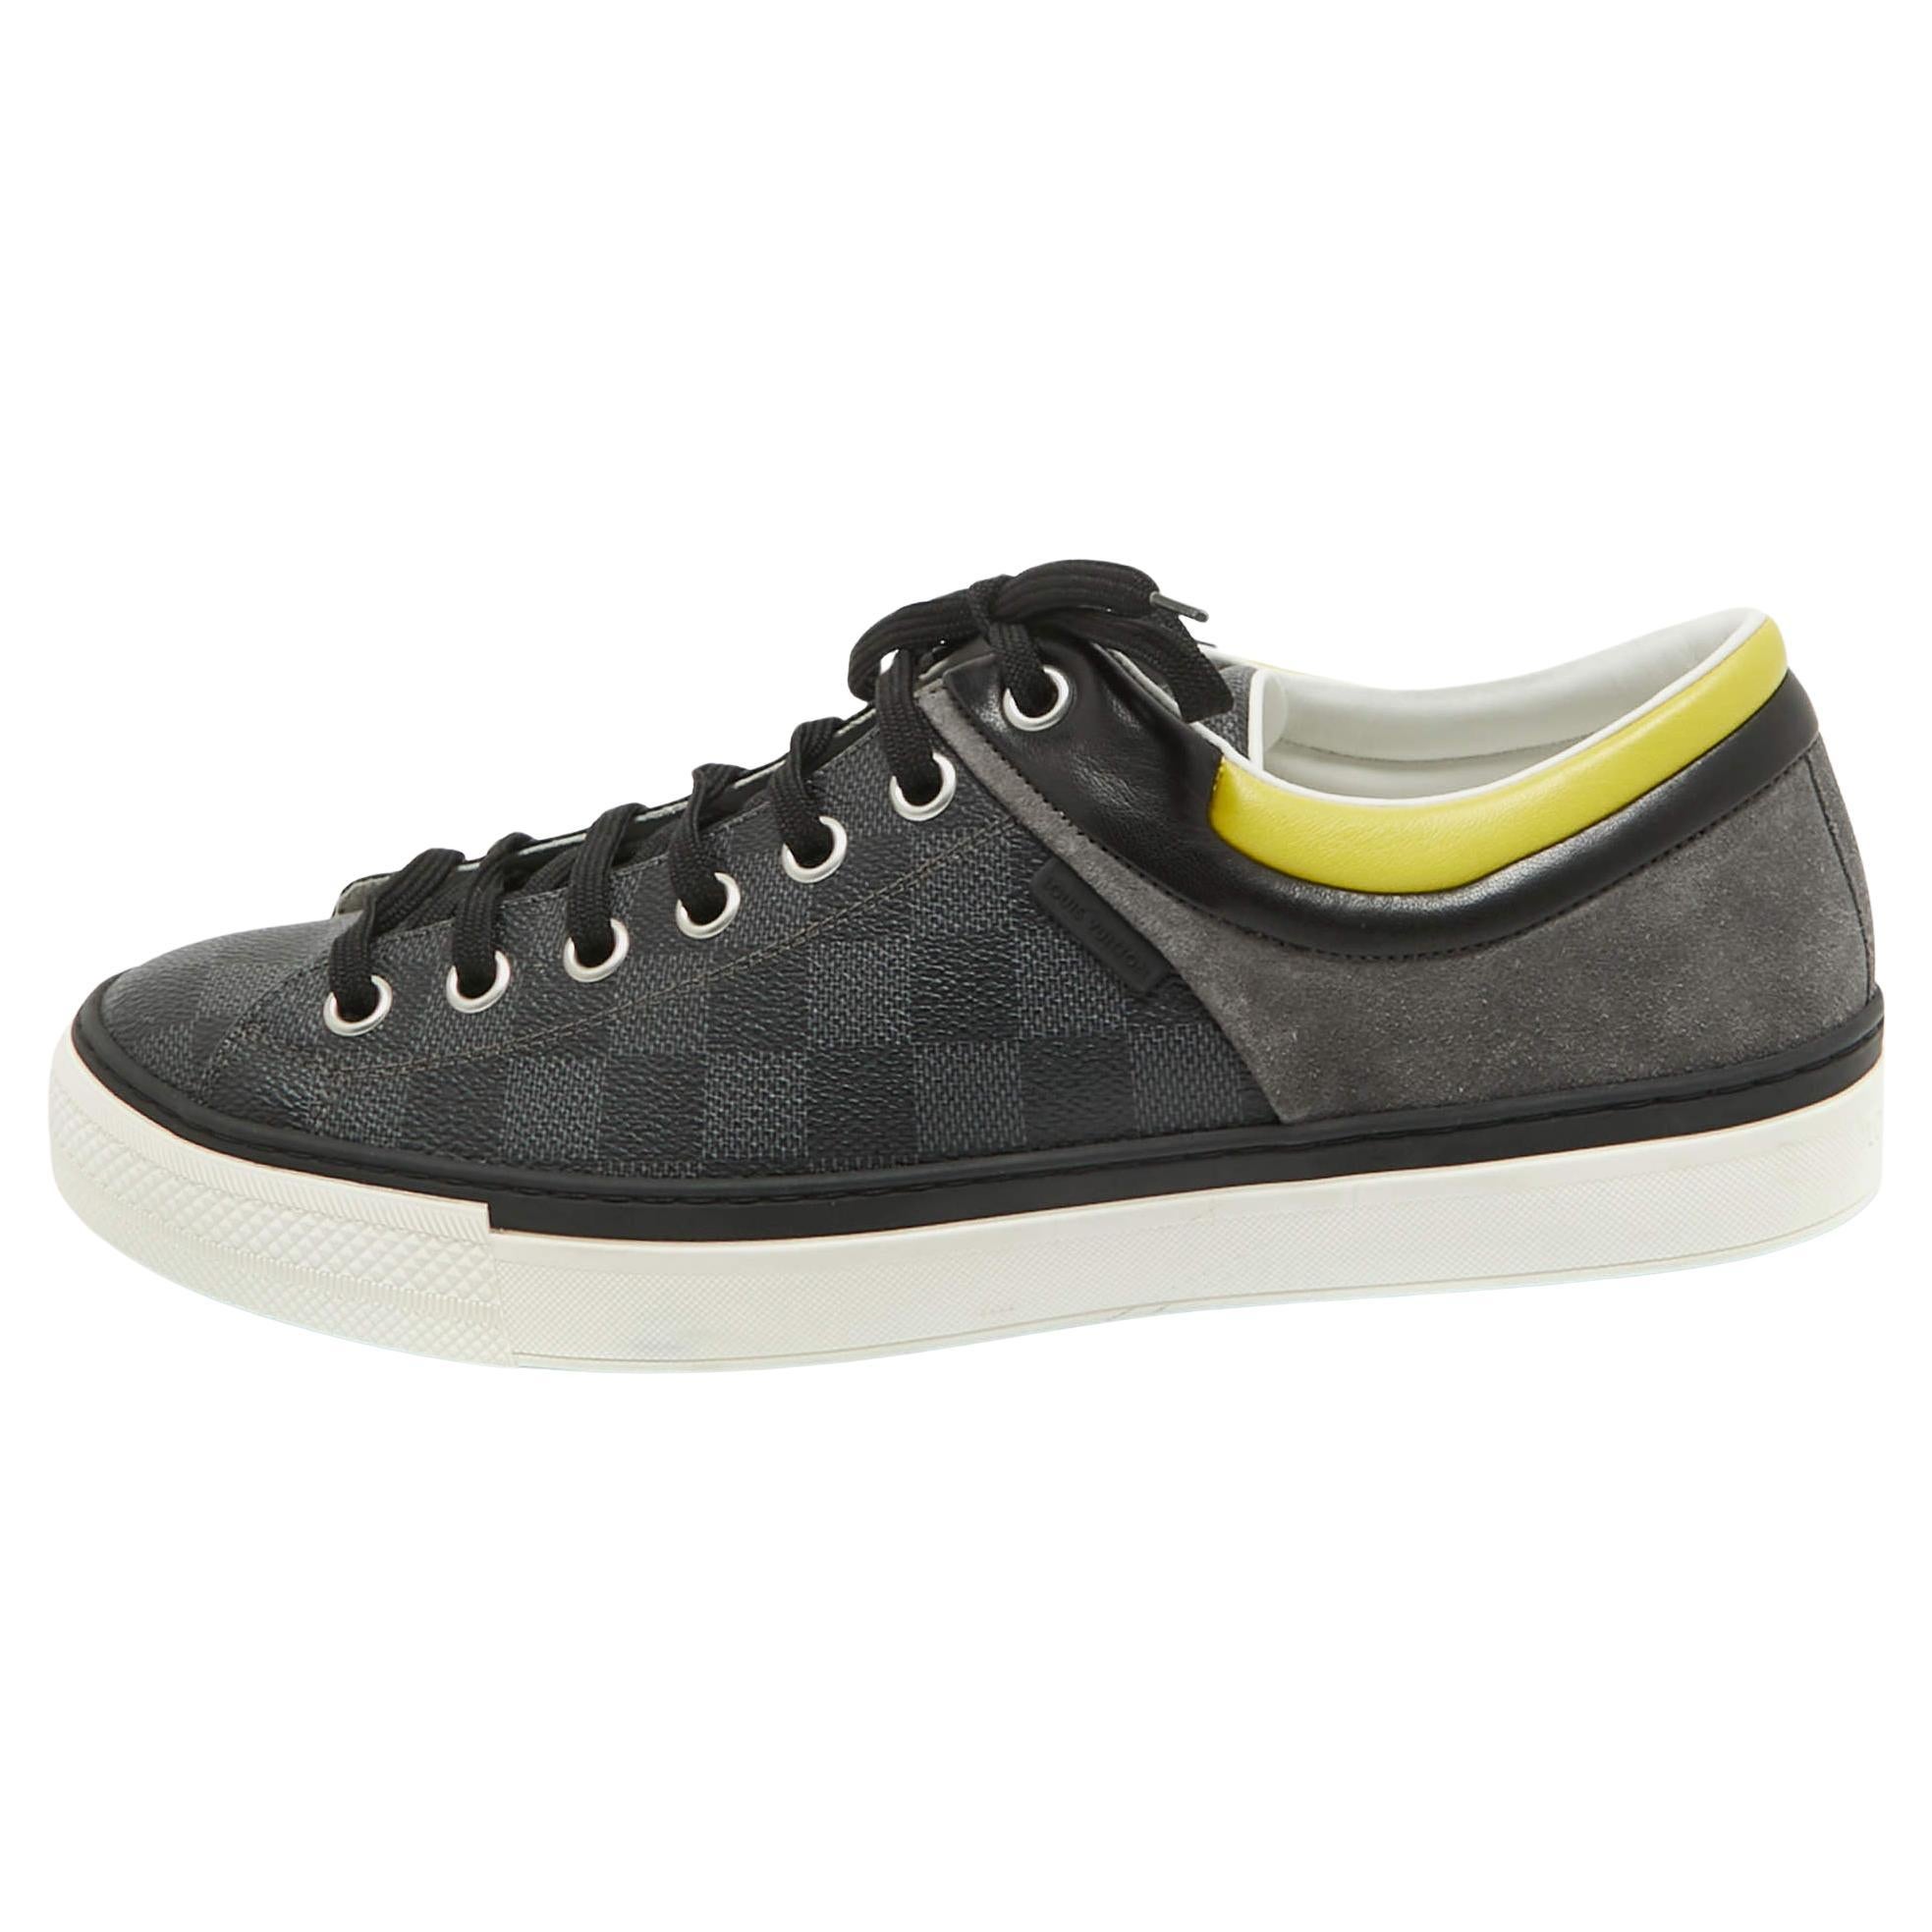 Louis Vuitton Black Canvas and Suede Graphite Low Top Sneakers Size 42.5 For Sale